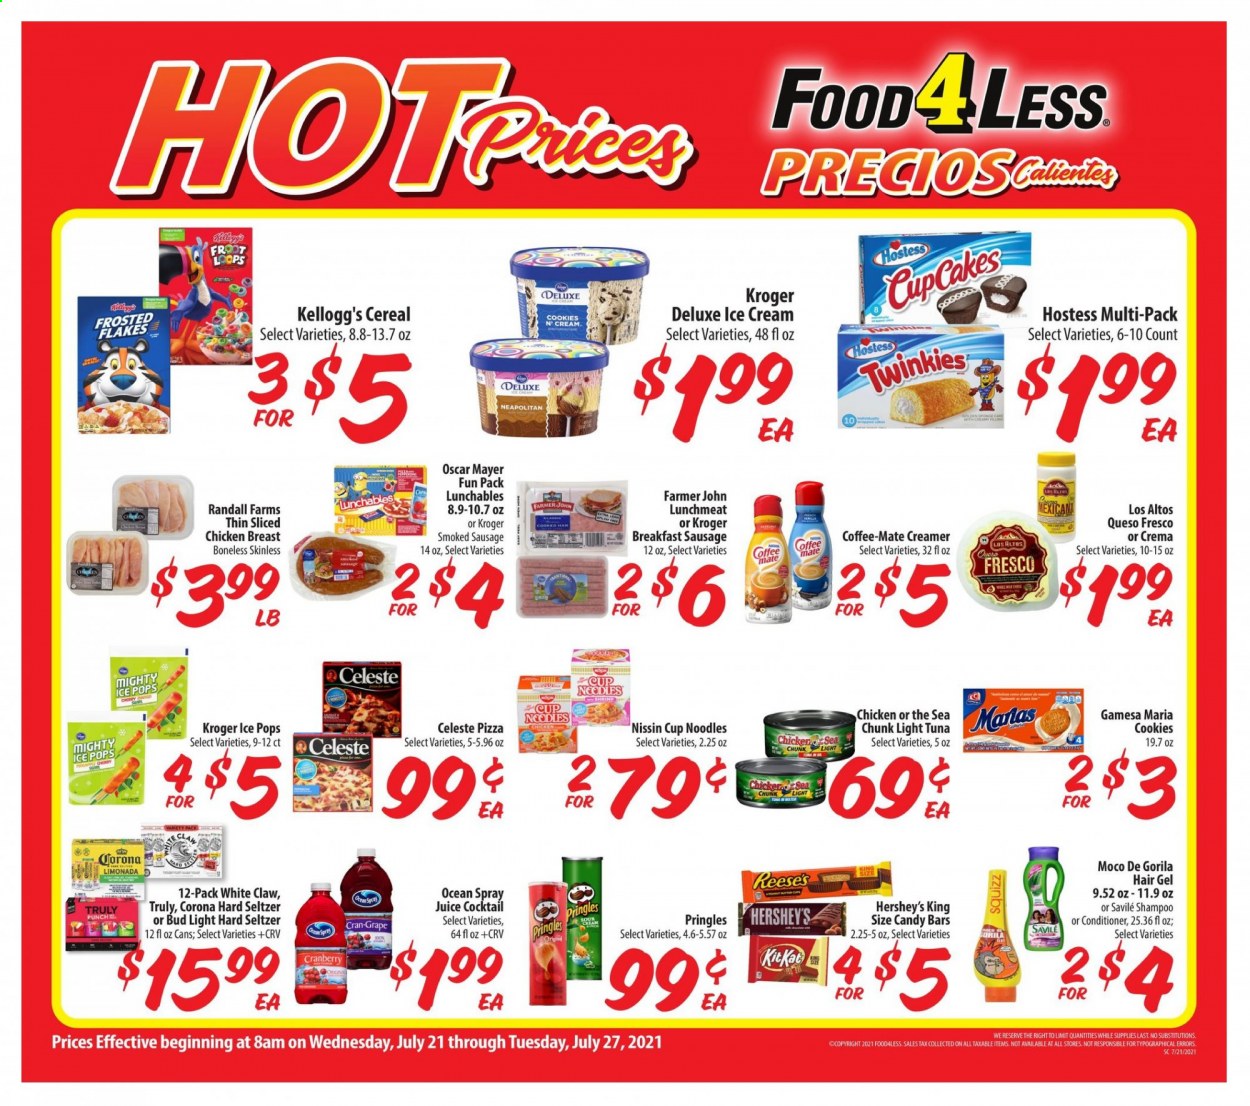 thumbnail - Food 4 Less Flyer - 07/21/2021 - 07/27/2021 - Sales products - cupcake, tuna, pizza, noodles cup, noodles, Lunchables, Nissin, Oscar Mayer, sausage, smoked sausage, lunch meat, queso fresco, Coffee-Mate, creamer, ice cream, Reese's, Hershey's, Celeste, cookies, Kellogg's, Pringles, light tuna, cereals, Frosted Flakes, juice, Cran-Grape, red wine, wine, punch, White Claw, Hard Seltzer, TRULY, beer, Bud Light, Corona Extra, chicken breasts, shampoo, conditioner. Page 2.